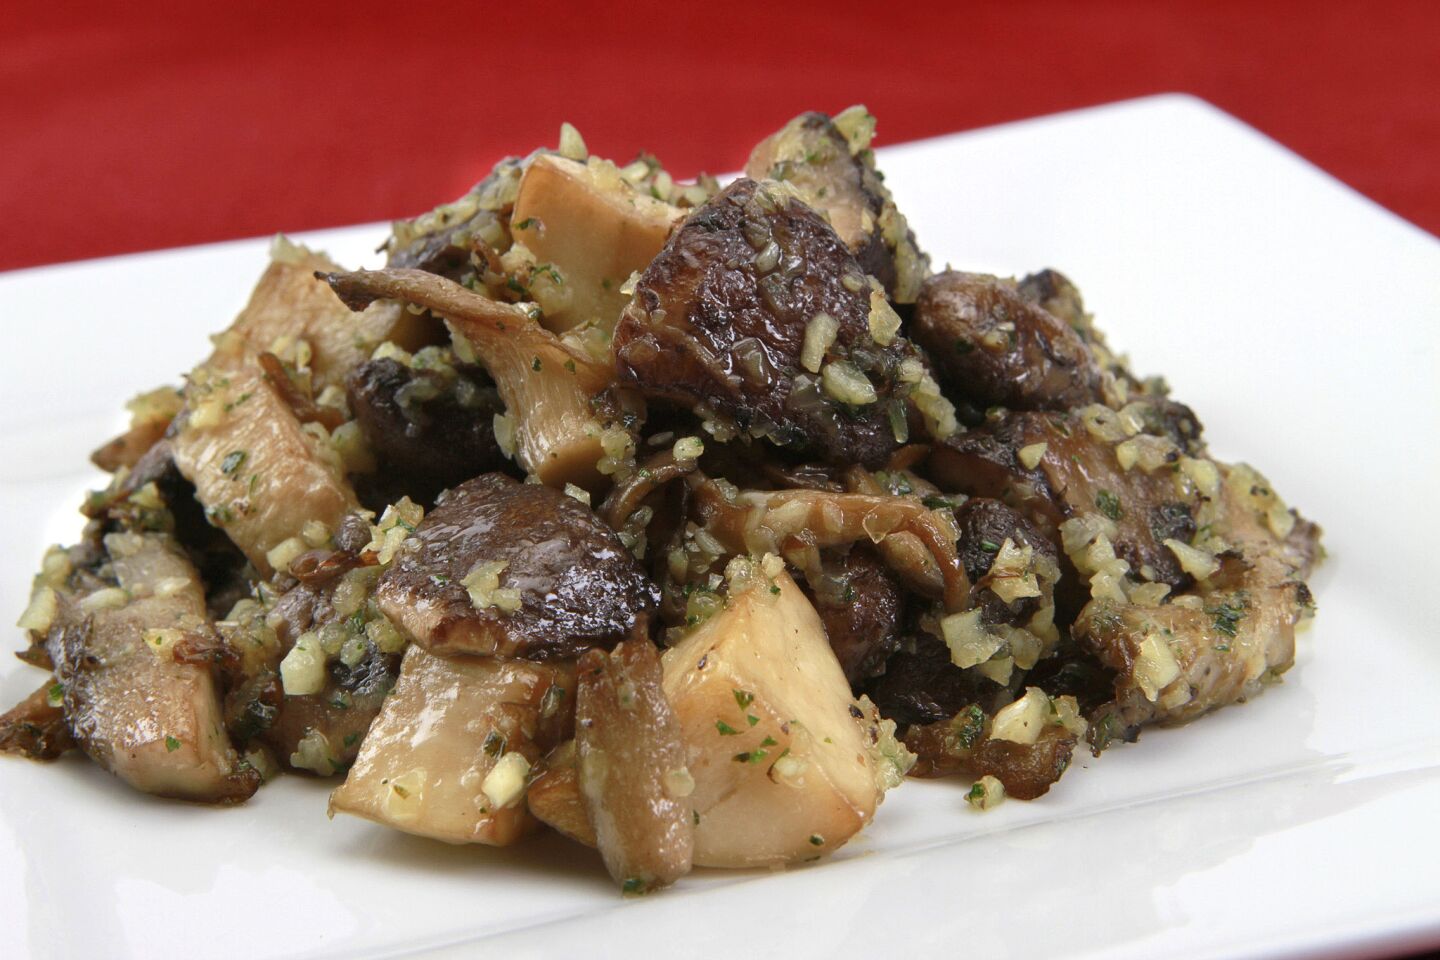 This works well either as a substantial side or light main course. Recipe: Craft's mushrooms